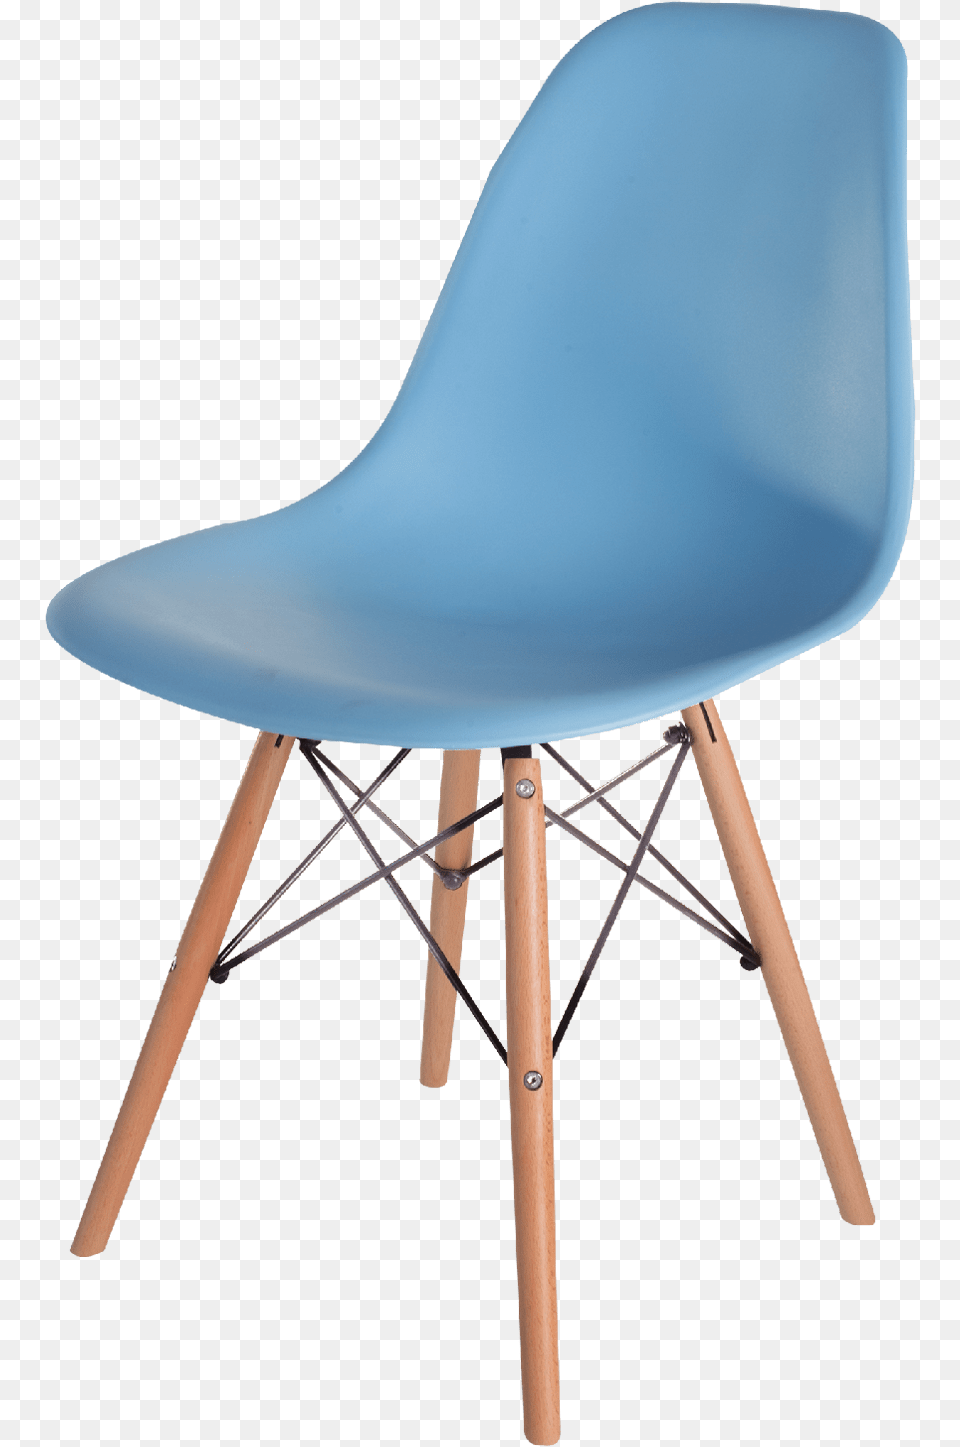 Silla Holly Azul Cielo Natural Tkezszk Trkiz, Furniture, Plywood, Wood, Chair Free Png Download